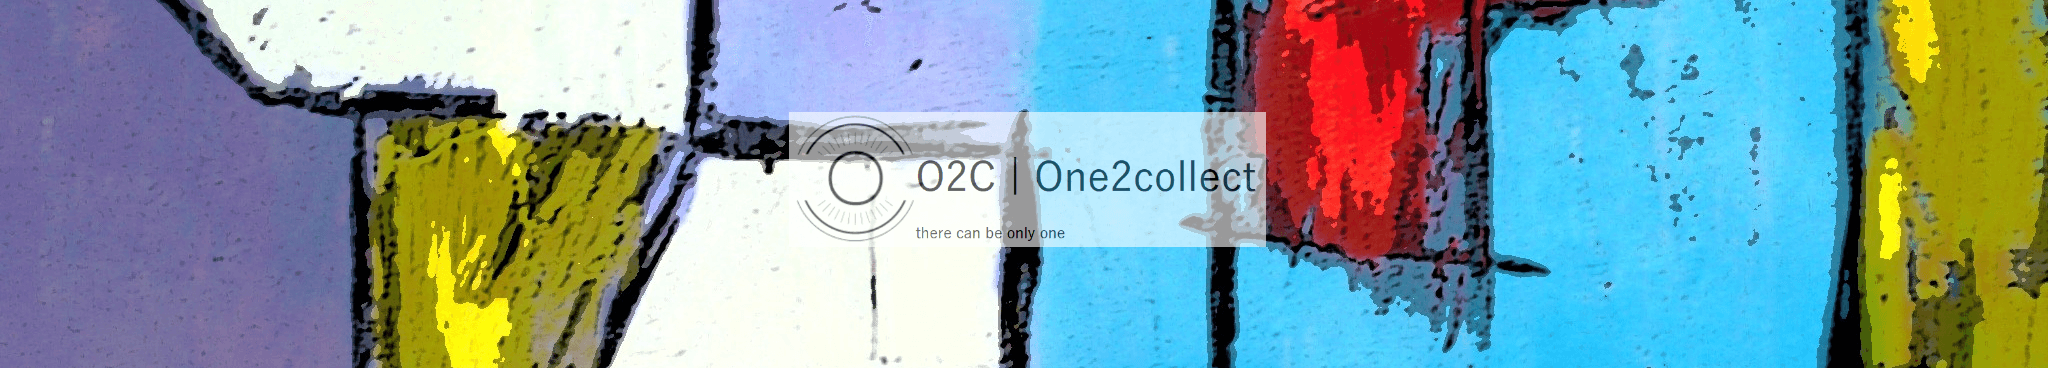 One2collect banner